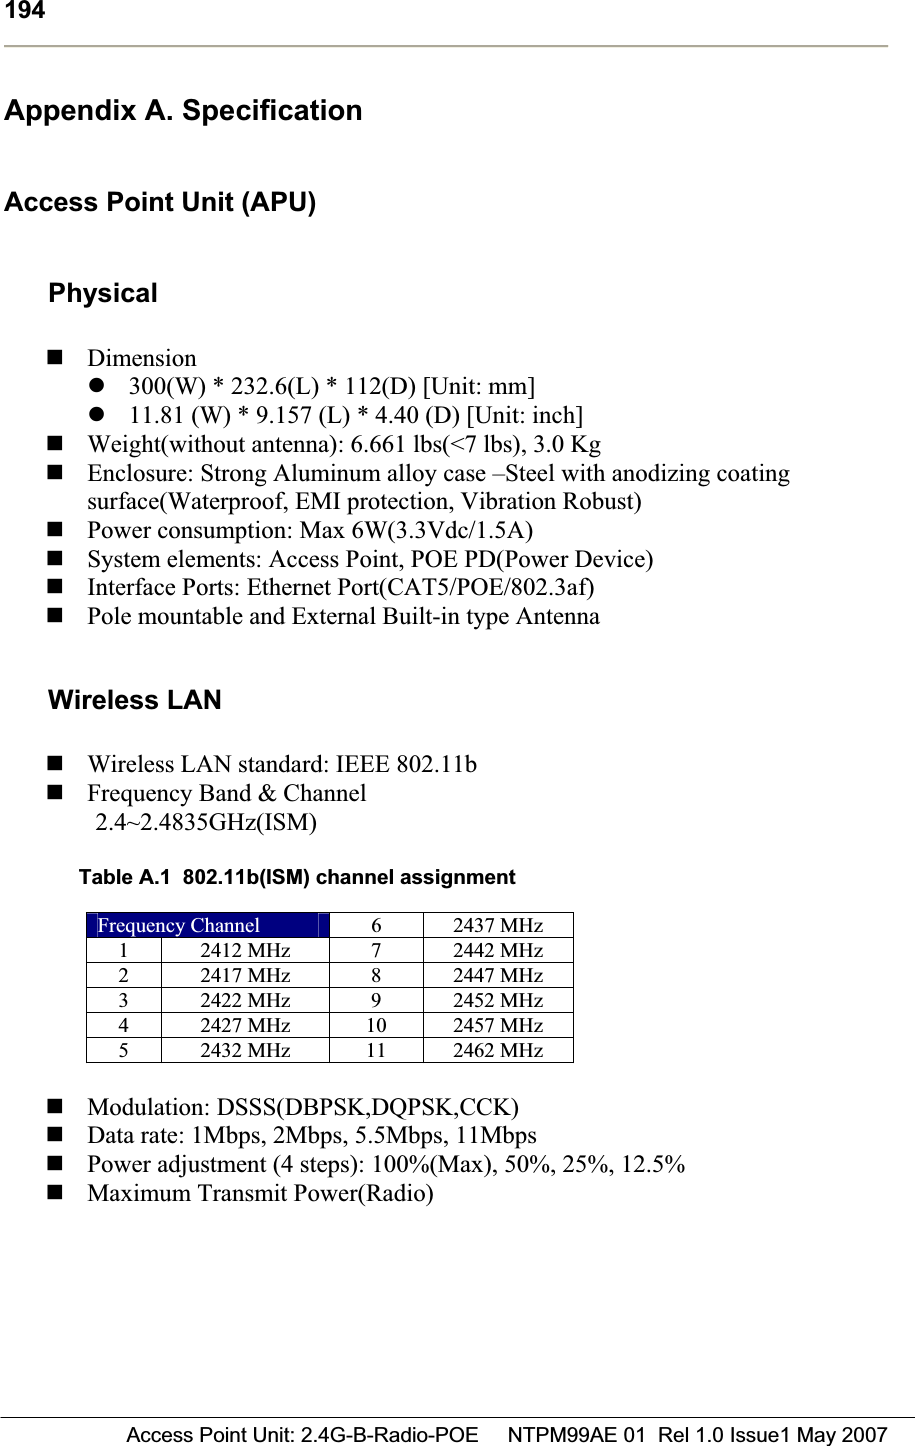 194 Access Point Unit: 2.4G-B-Radio-POE     NTPM99AE 01  Rel 1.0 Issue1 May 2007Appendix A. Specification Access Point Unit (APU) Physical Dimension z300(W) * 232.6(L) * 112(D) [Unit: mm] z11.81 (W) * 9.157 (L) * 4.40 (D) [Unit: inch] Weight(without antenna): 6.661 lbs(&lt;7 lbs), 3.0 Kg Enclosure: Strong Aluminum alloy case –Steel with anodizing coating surface(Waterproof, EMI protection, Vibration Robust) Power consumption: Max 6W(3.3Vdc/1.5A) System elements: Access Point, POE PD(Power Device) Interface Ports: Ethernet Port(CAT5/POE/802.3af) Pole mountable and External Built-in type Antenna  Wireless LANWireless LAN standard: IEEE 802.11b Frequency Band &amp; Channel 2.4~2.4835GHz(ISM)Table A.1  802.11b(ISM) channel assignment Frequency Channel  6 2437 MHz 1 2412 MHz  7 2442 MHz 2 2417 MHz  8 2447 MHz 3 2422 MHz  9 2452 MHz 4  2427 MHz  10  2457 MHz 5  2432 MHz  11  2462 MHz Modulation: DSSS(DBPSK,DQPSK,CCK)  Data rate: 1Mbps, 2Mbps, 5.5Mbps, 11Mbps Power adjustment (4 steps): 100%(Max), 50%, 25%, 12.5%  Maximum Transmit Power(Radio)  